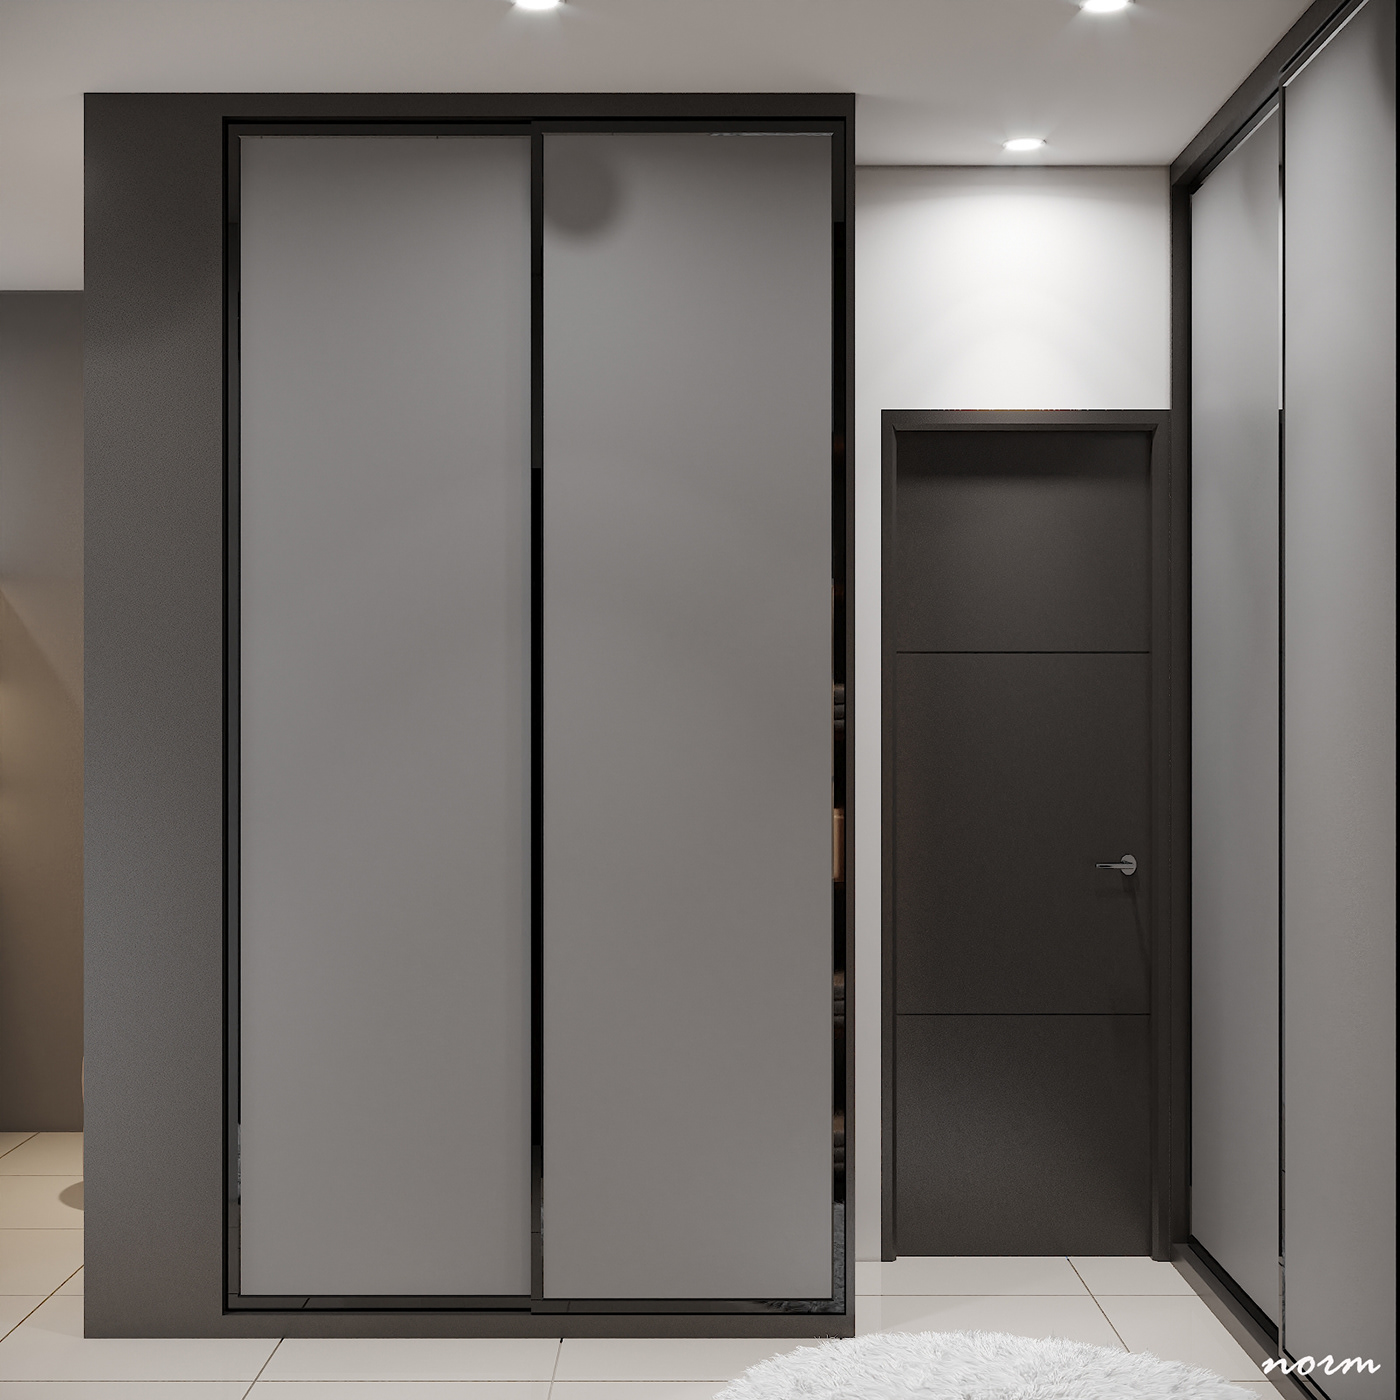 With a unique blend of minimalist elements, convenient functions, and modern beauty, a gray wardrobe creates a sense of harmony, soothing to the eye.